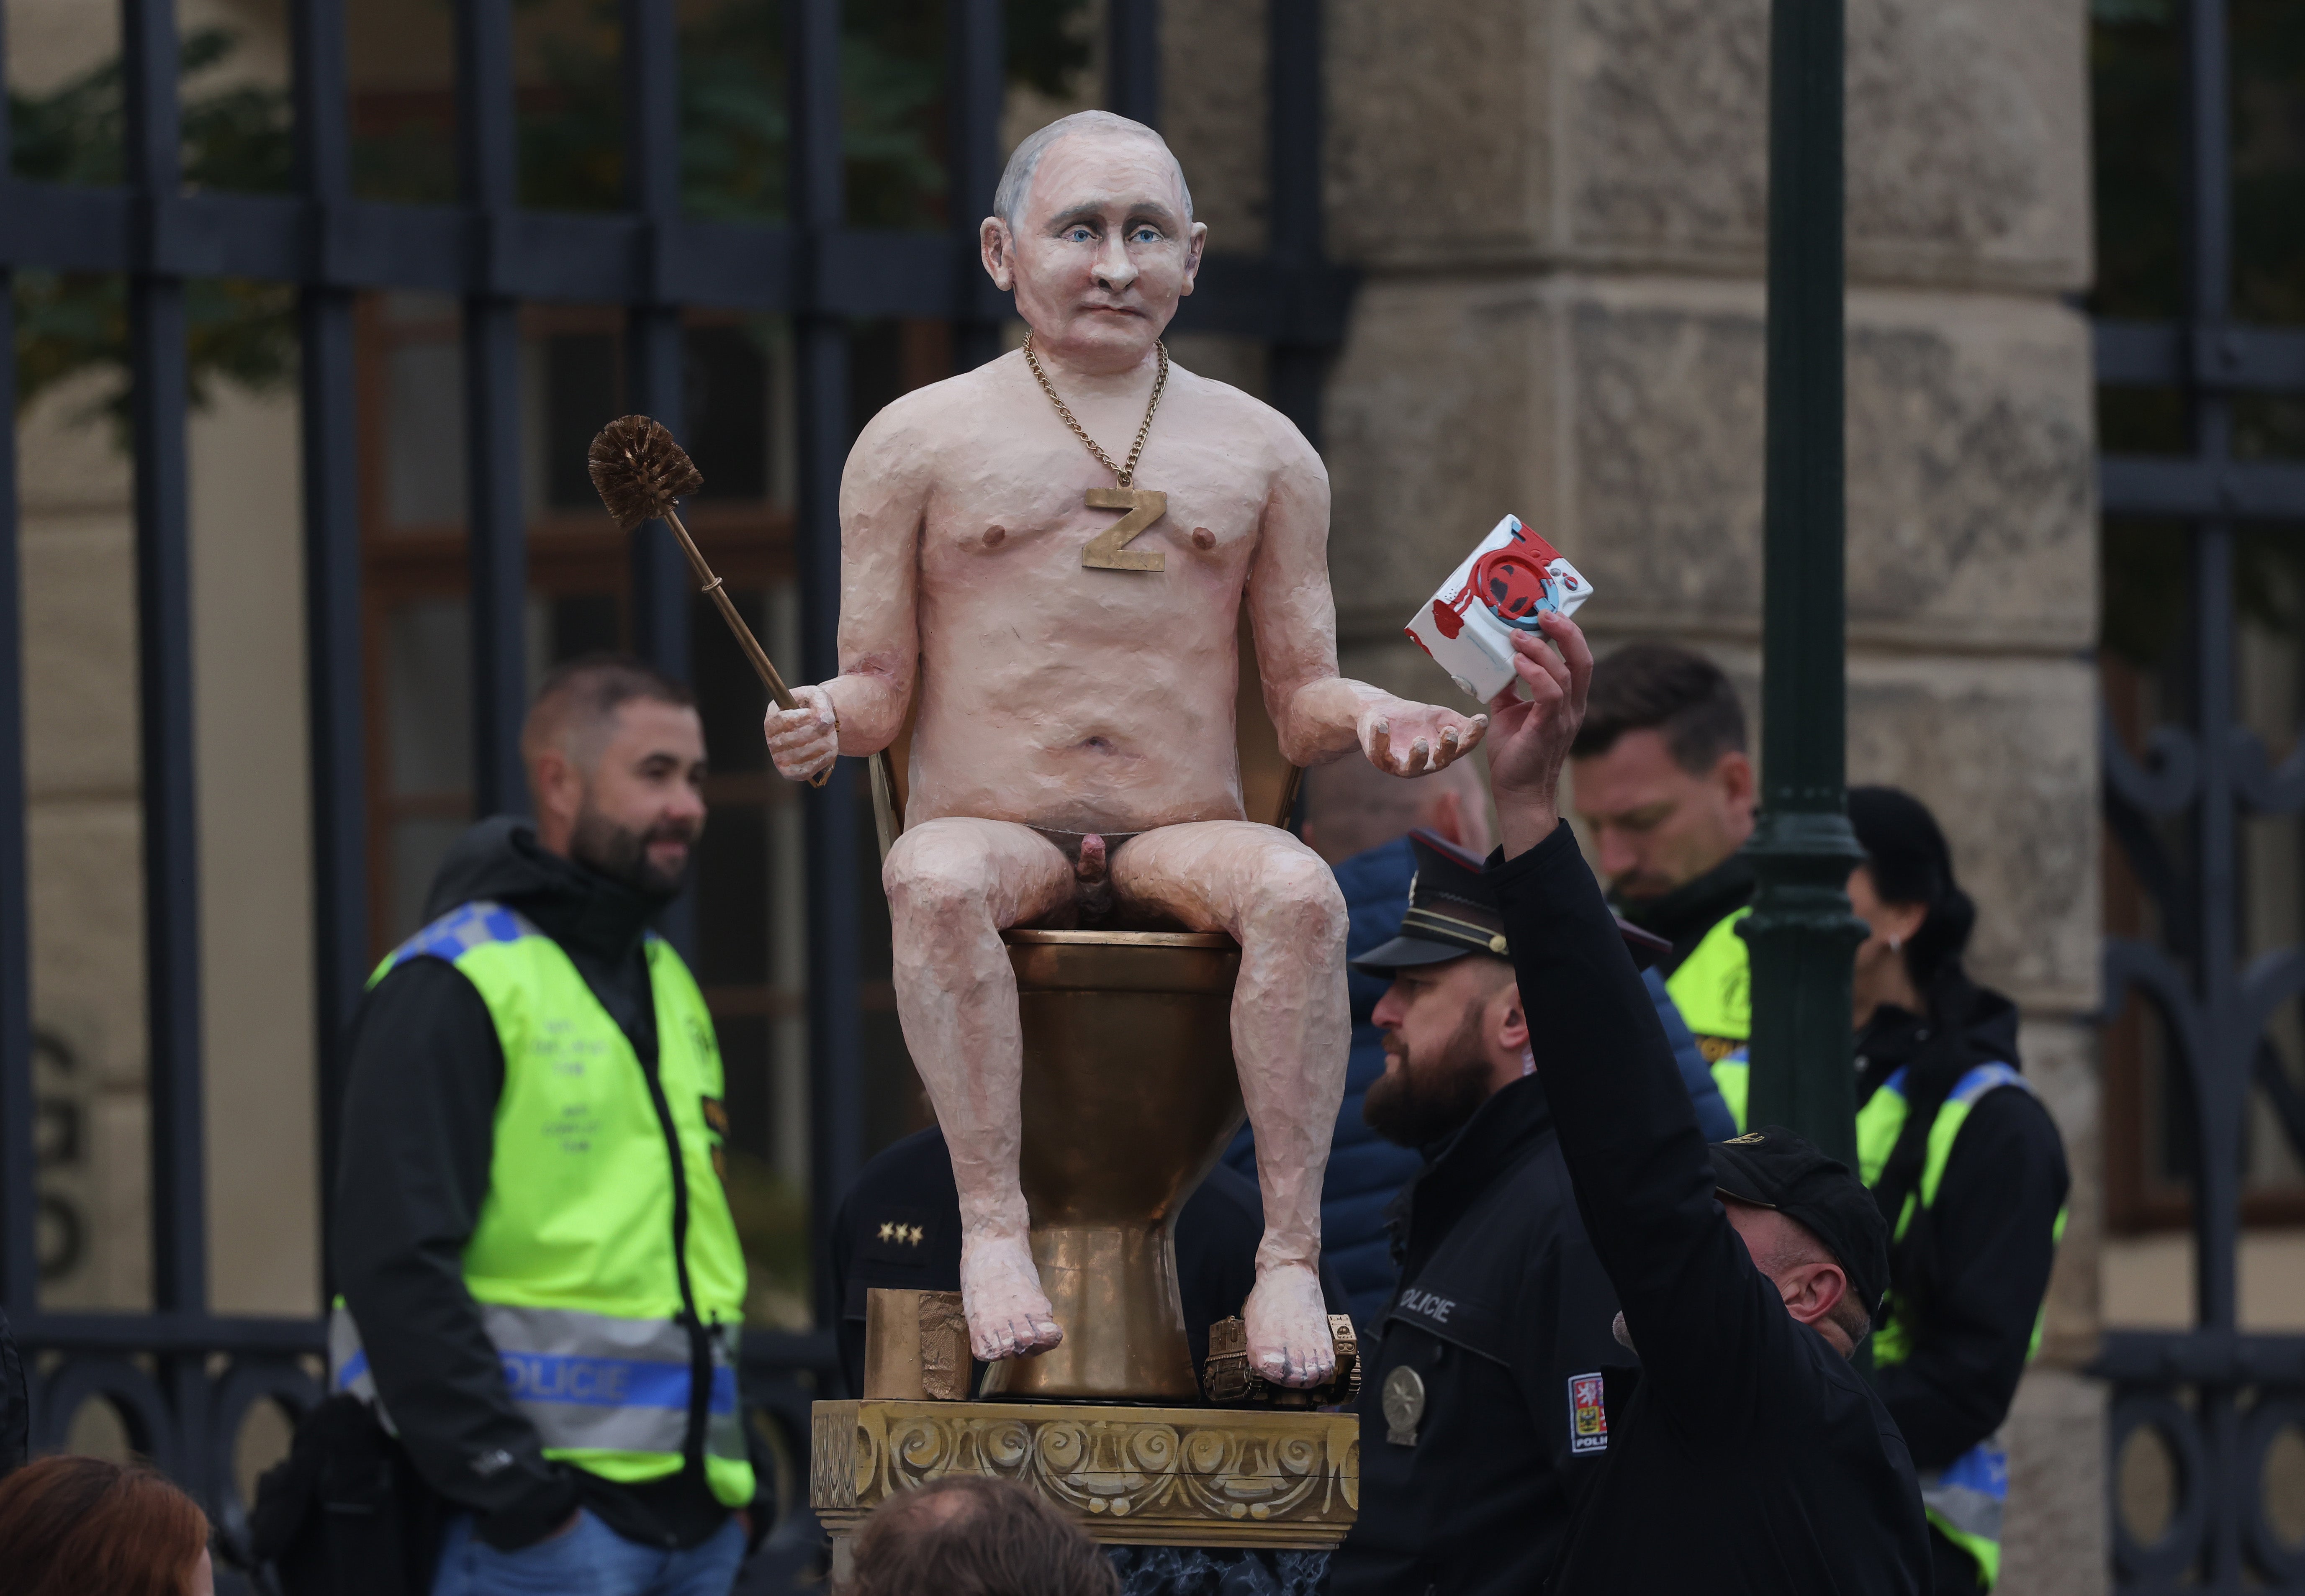 The Putin statue is seen gripping a golden toilet brush and toy washing machine pouring with fake blood